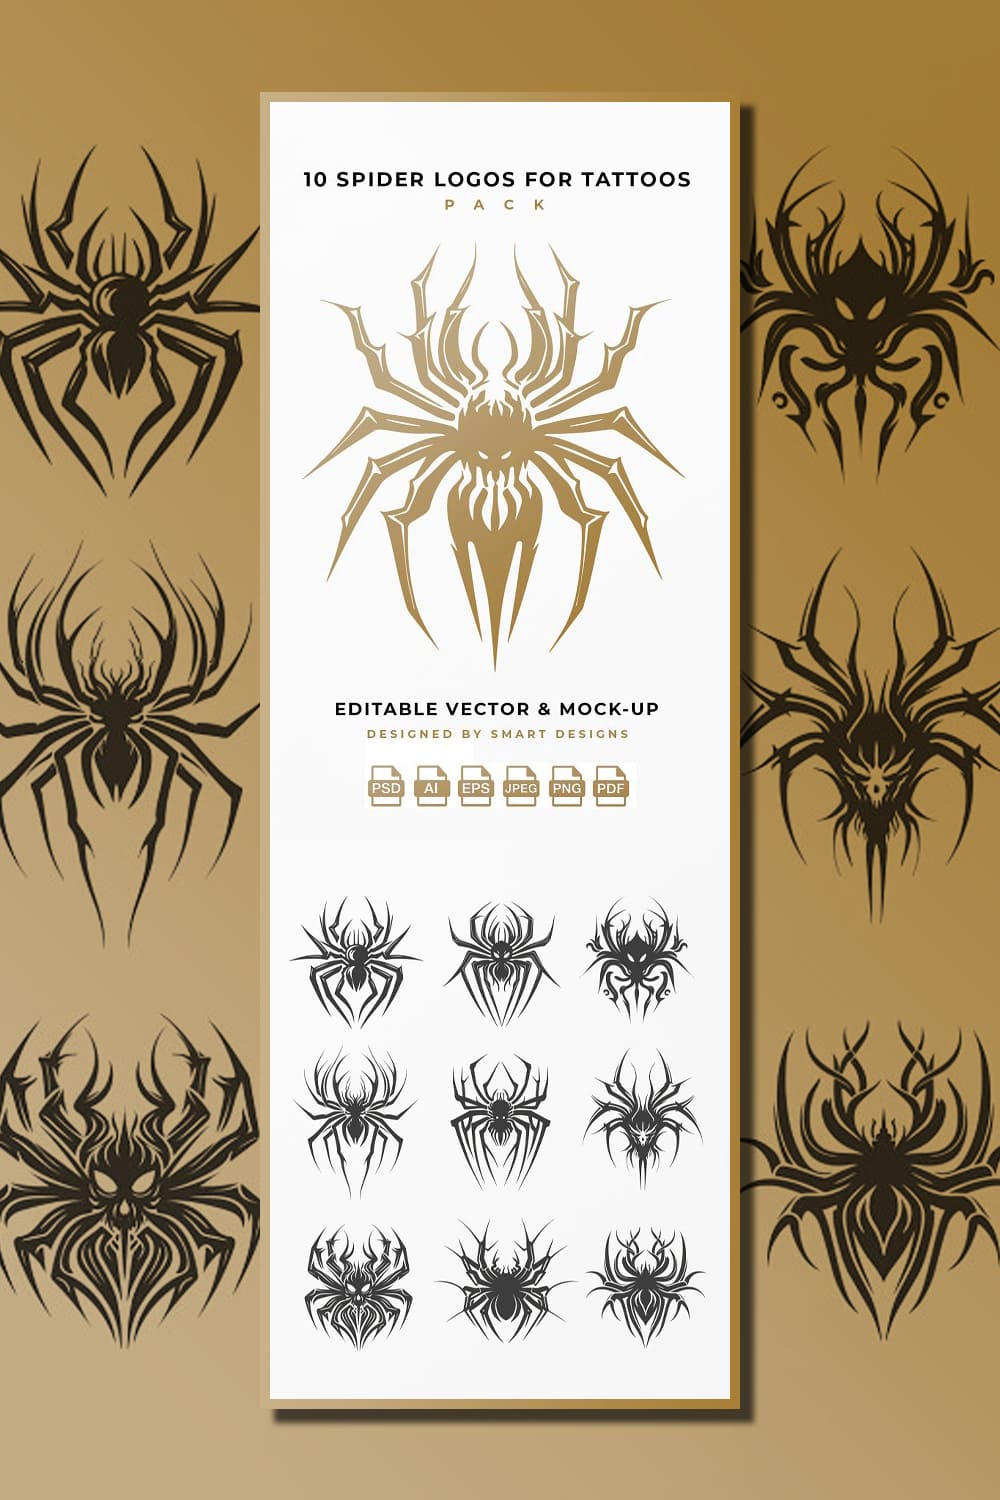 Spider Logos for Tattoos Pack x10 pinterest image preview.